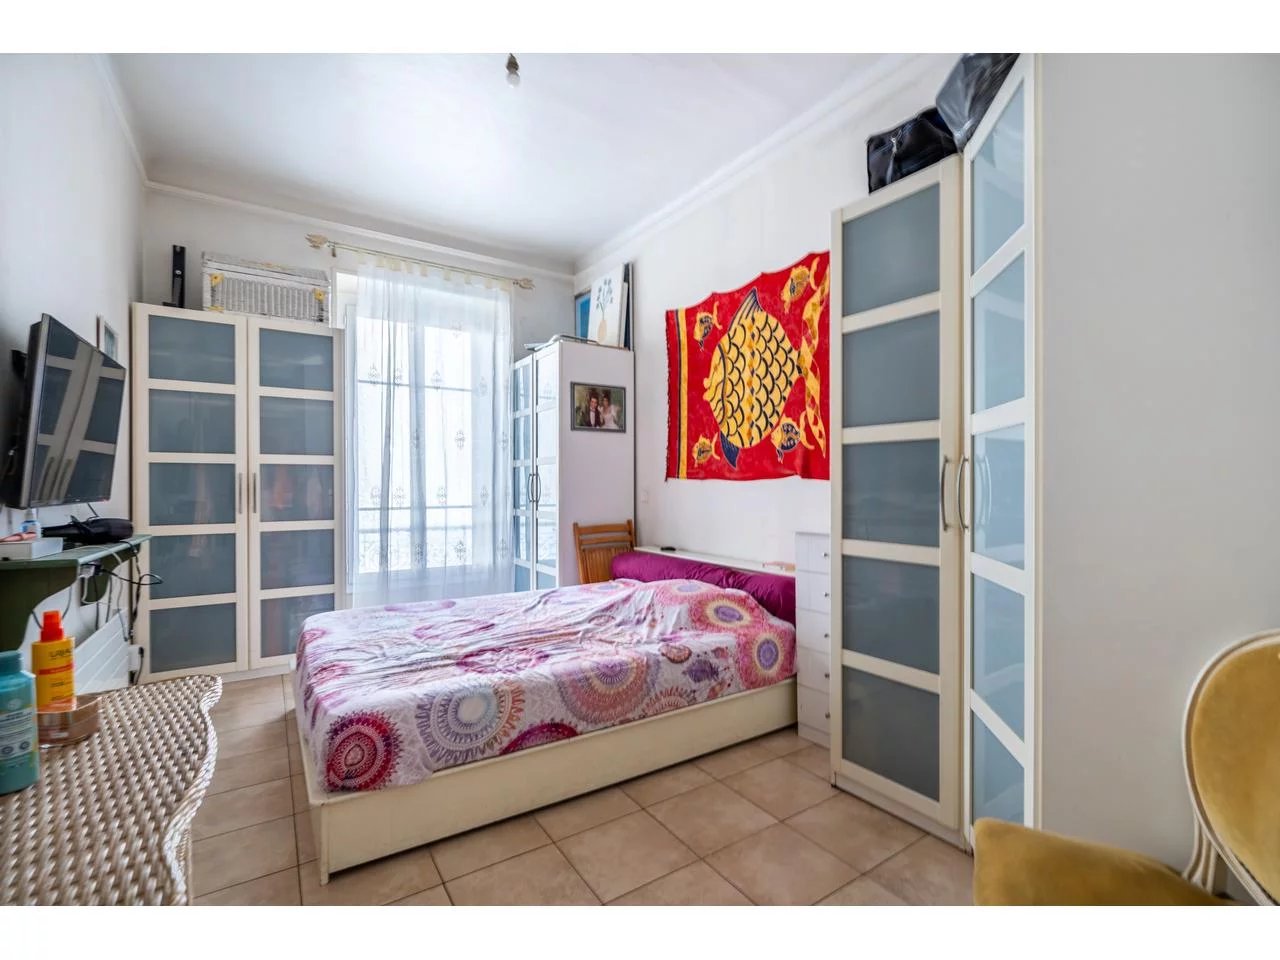 Appartement  5 Rooms 136.55m2  for sale   529 000 €